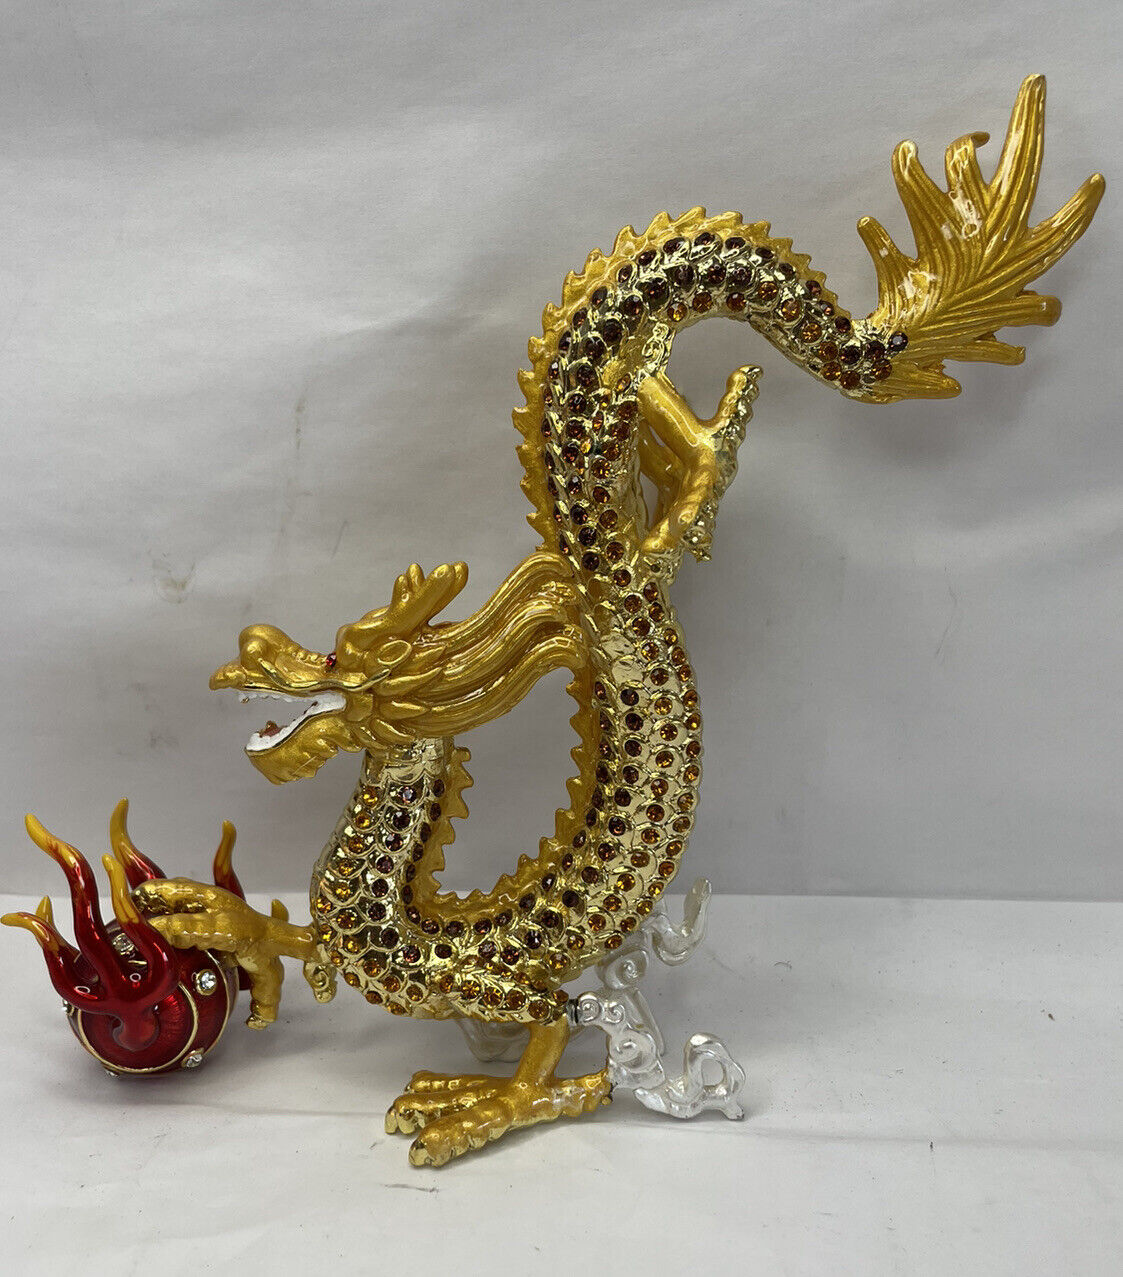 Chinese Golden Dragon Figurine With Ball Of Fire Metal Feng Shui Wealth Fortune